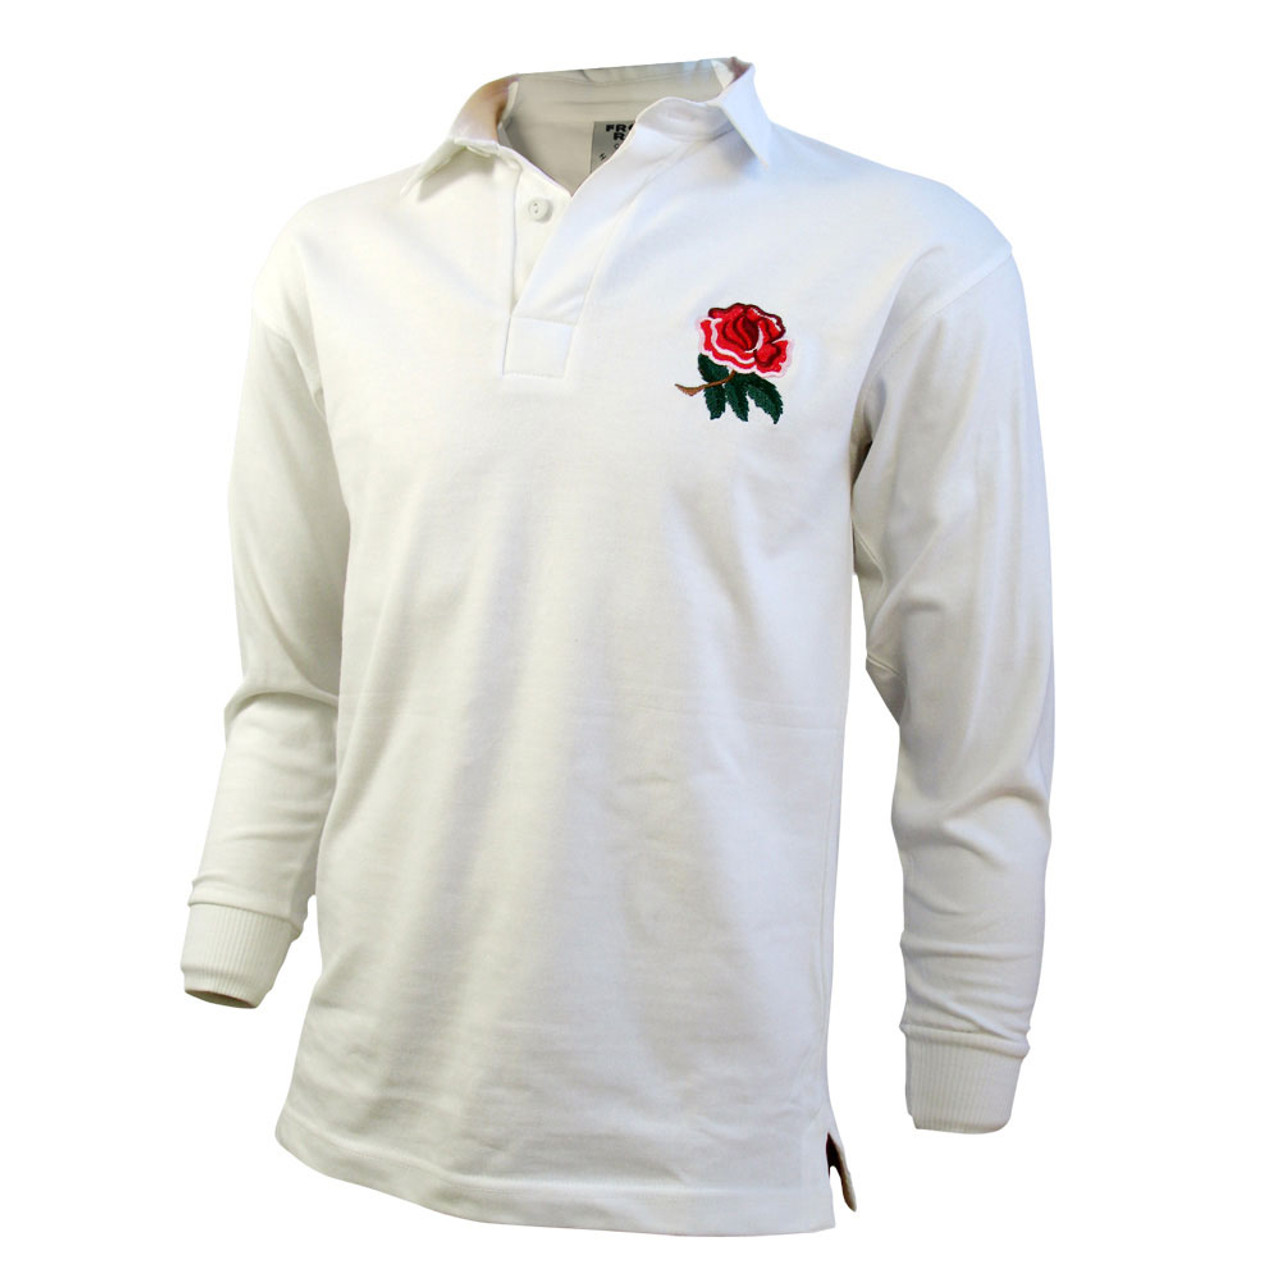 traditional england rugby shirt